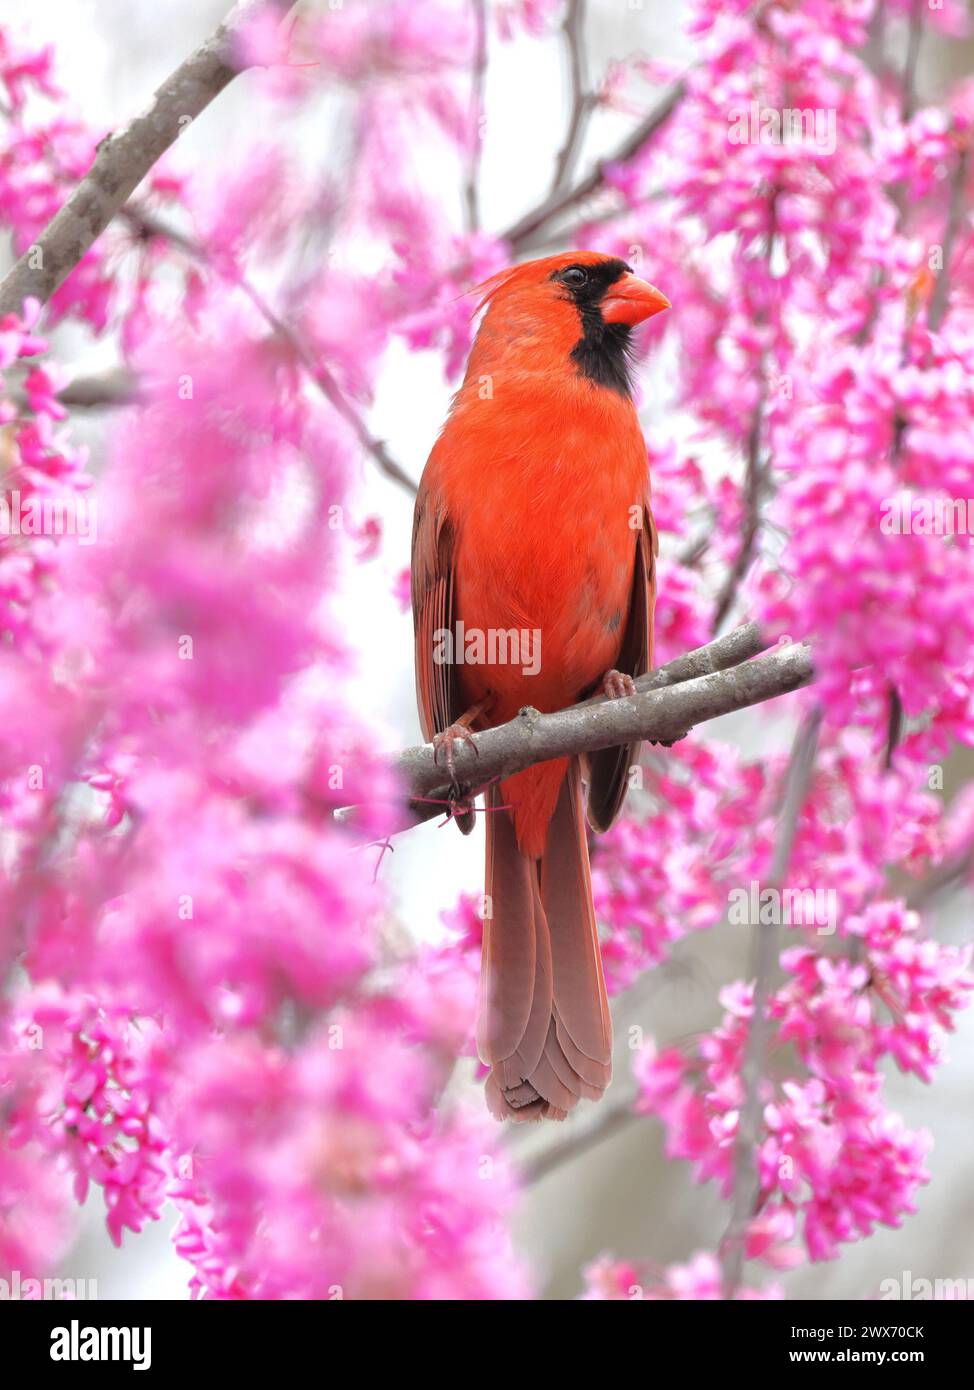 A tiny red bird perched on a tree branchy Stock Photo